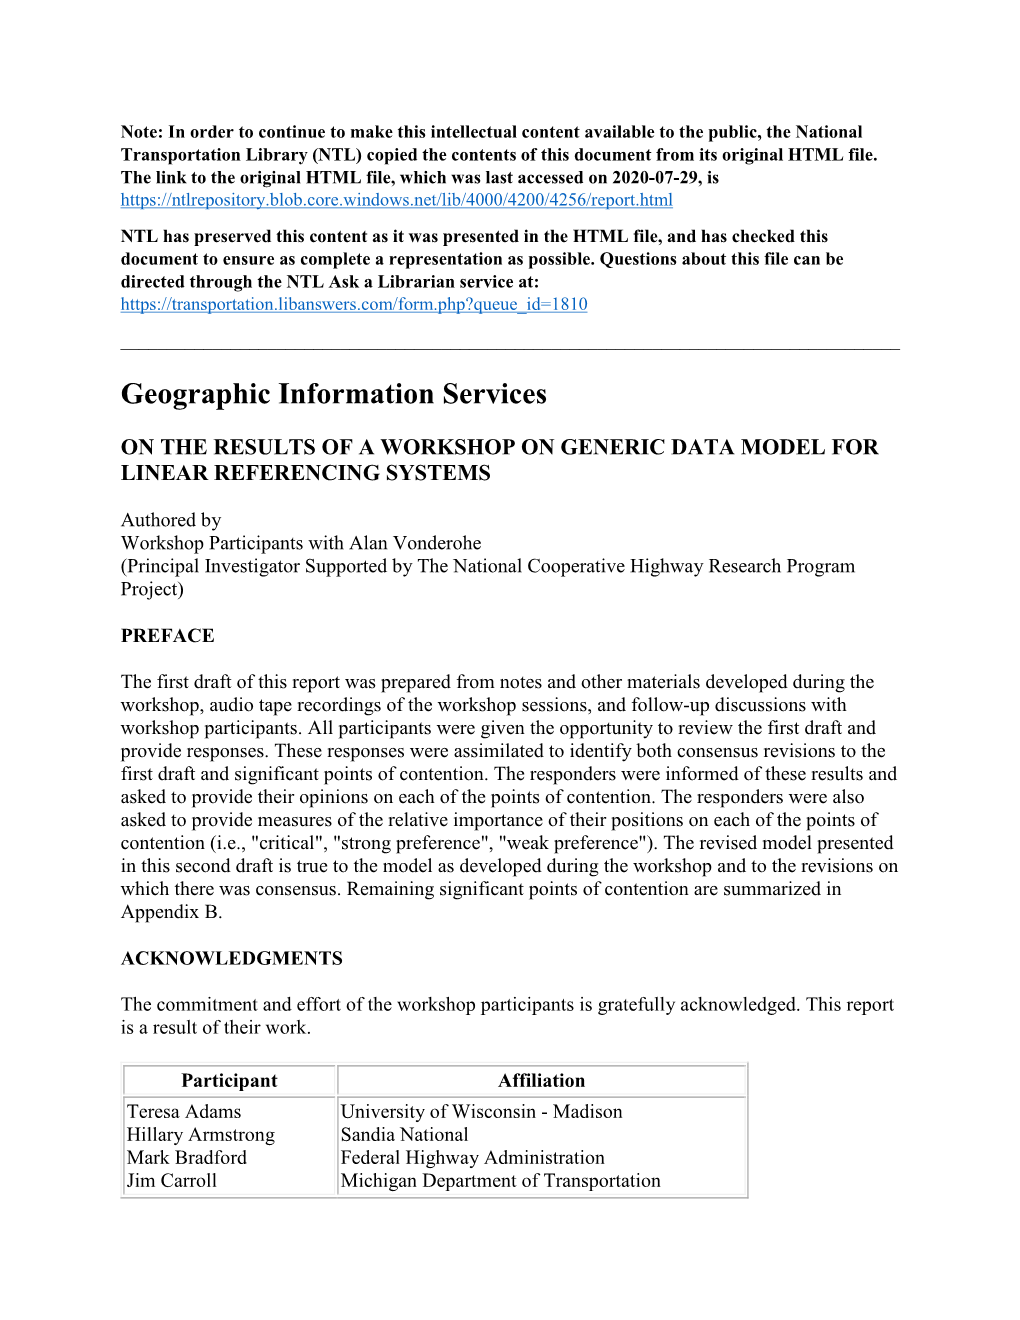 Geographic Information Services